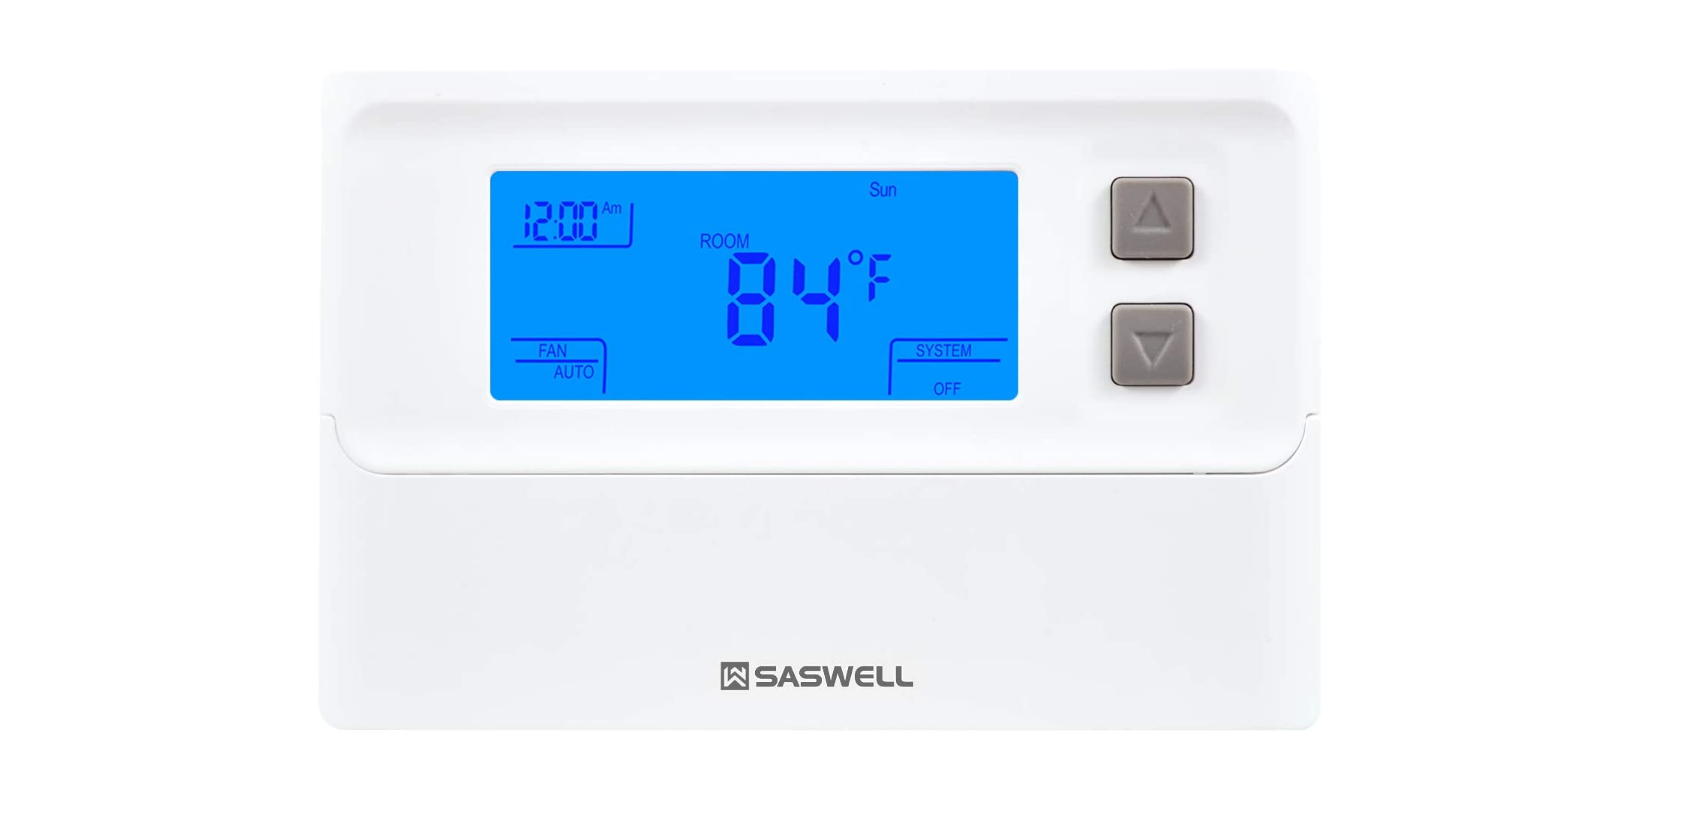 SASWELL T21STK-2 Single Stage Programmable HVAC Thermostat Operating Instruction